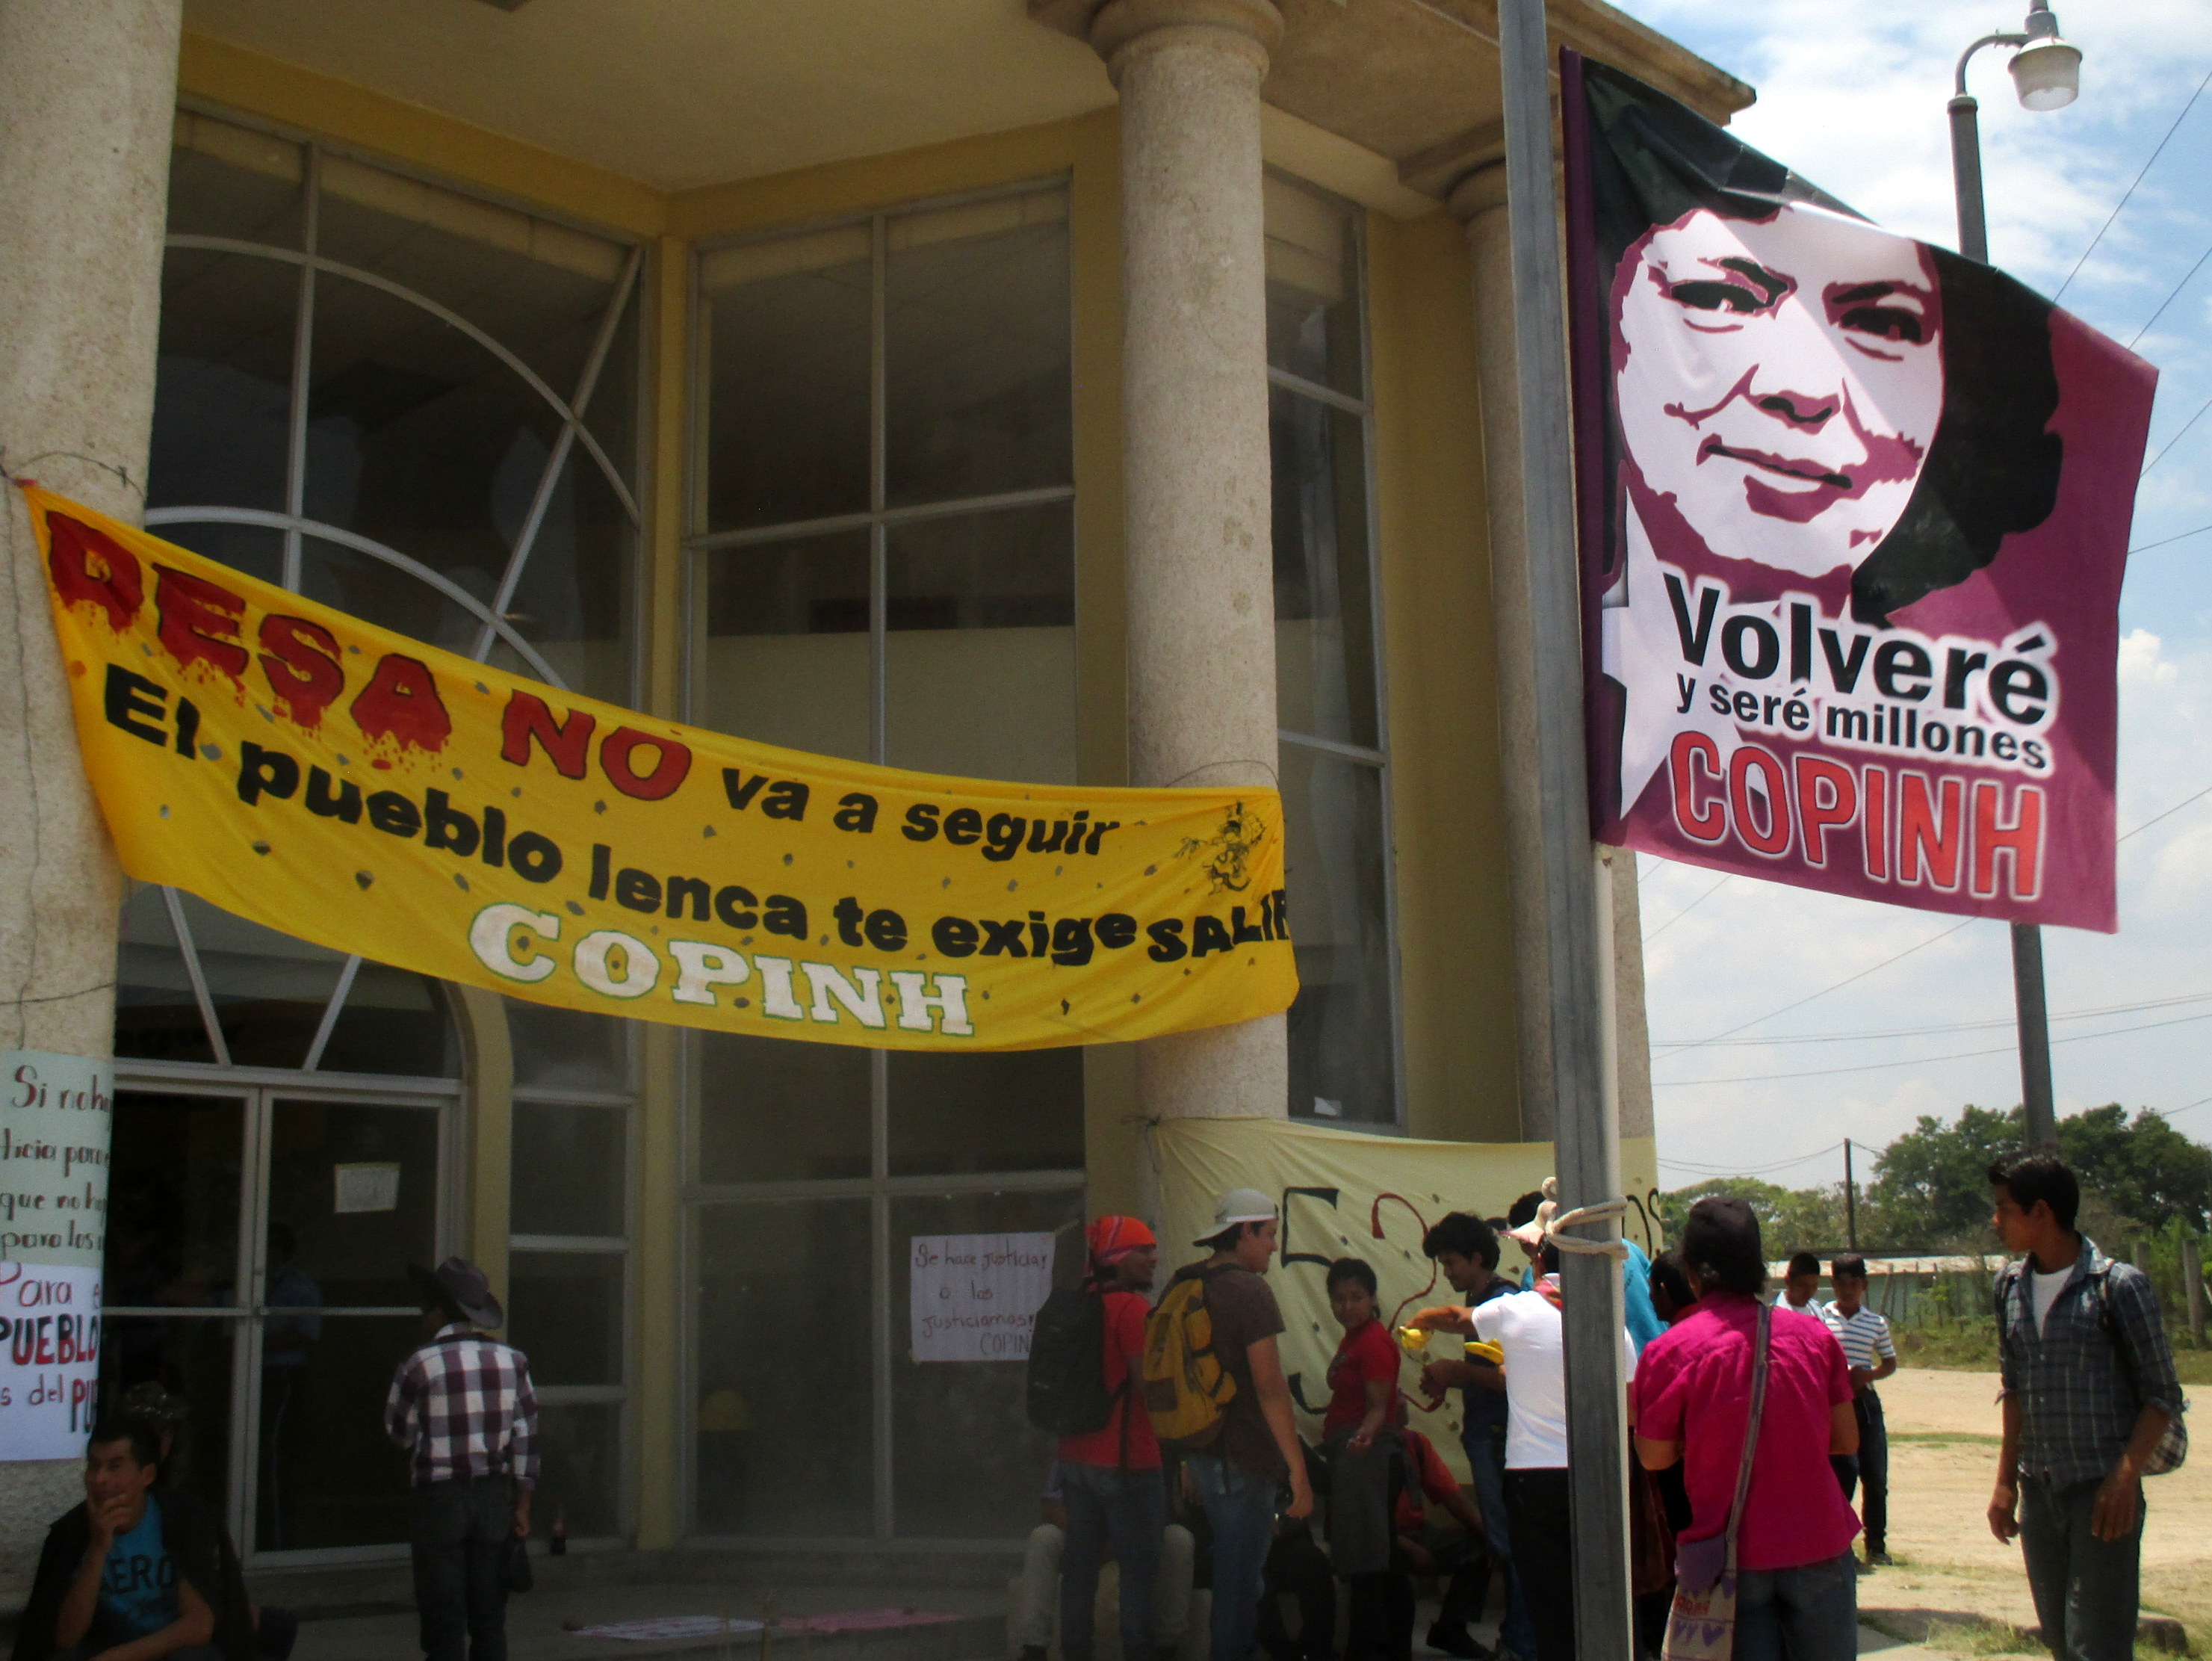 "I will return, and I will be millions," reads a flag with Berta Cáceres's image outside the Siguatepeque courthouse during an April court case related to the authorization of the Agua Zarca dam.